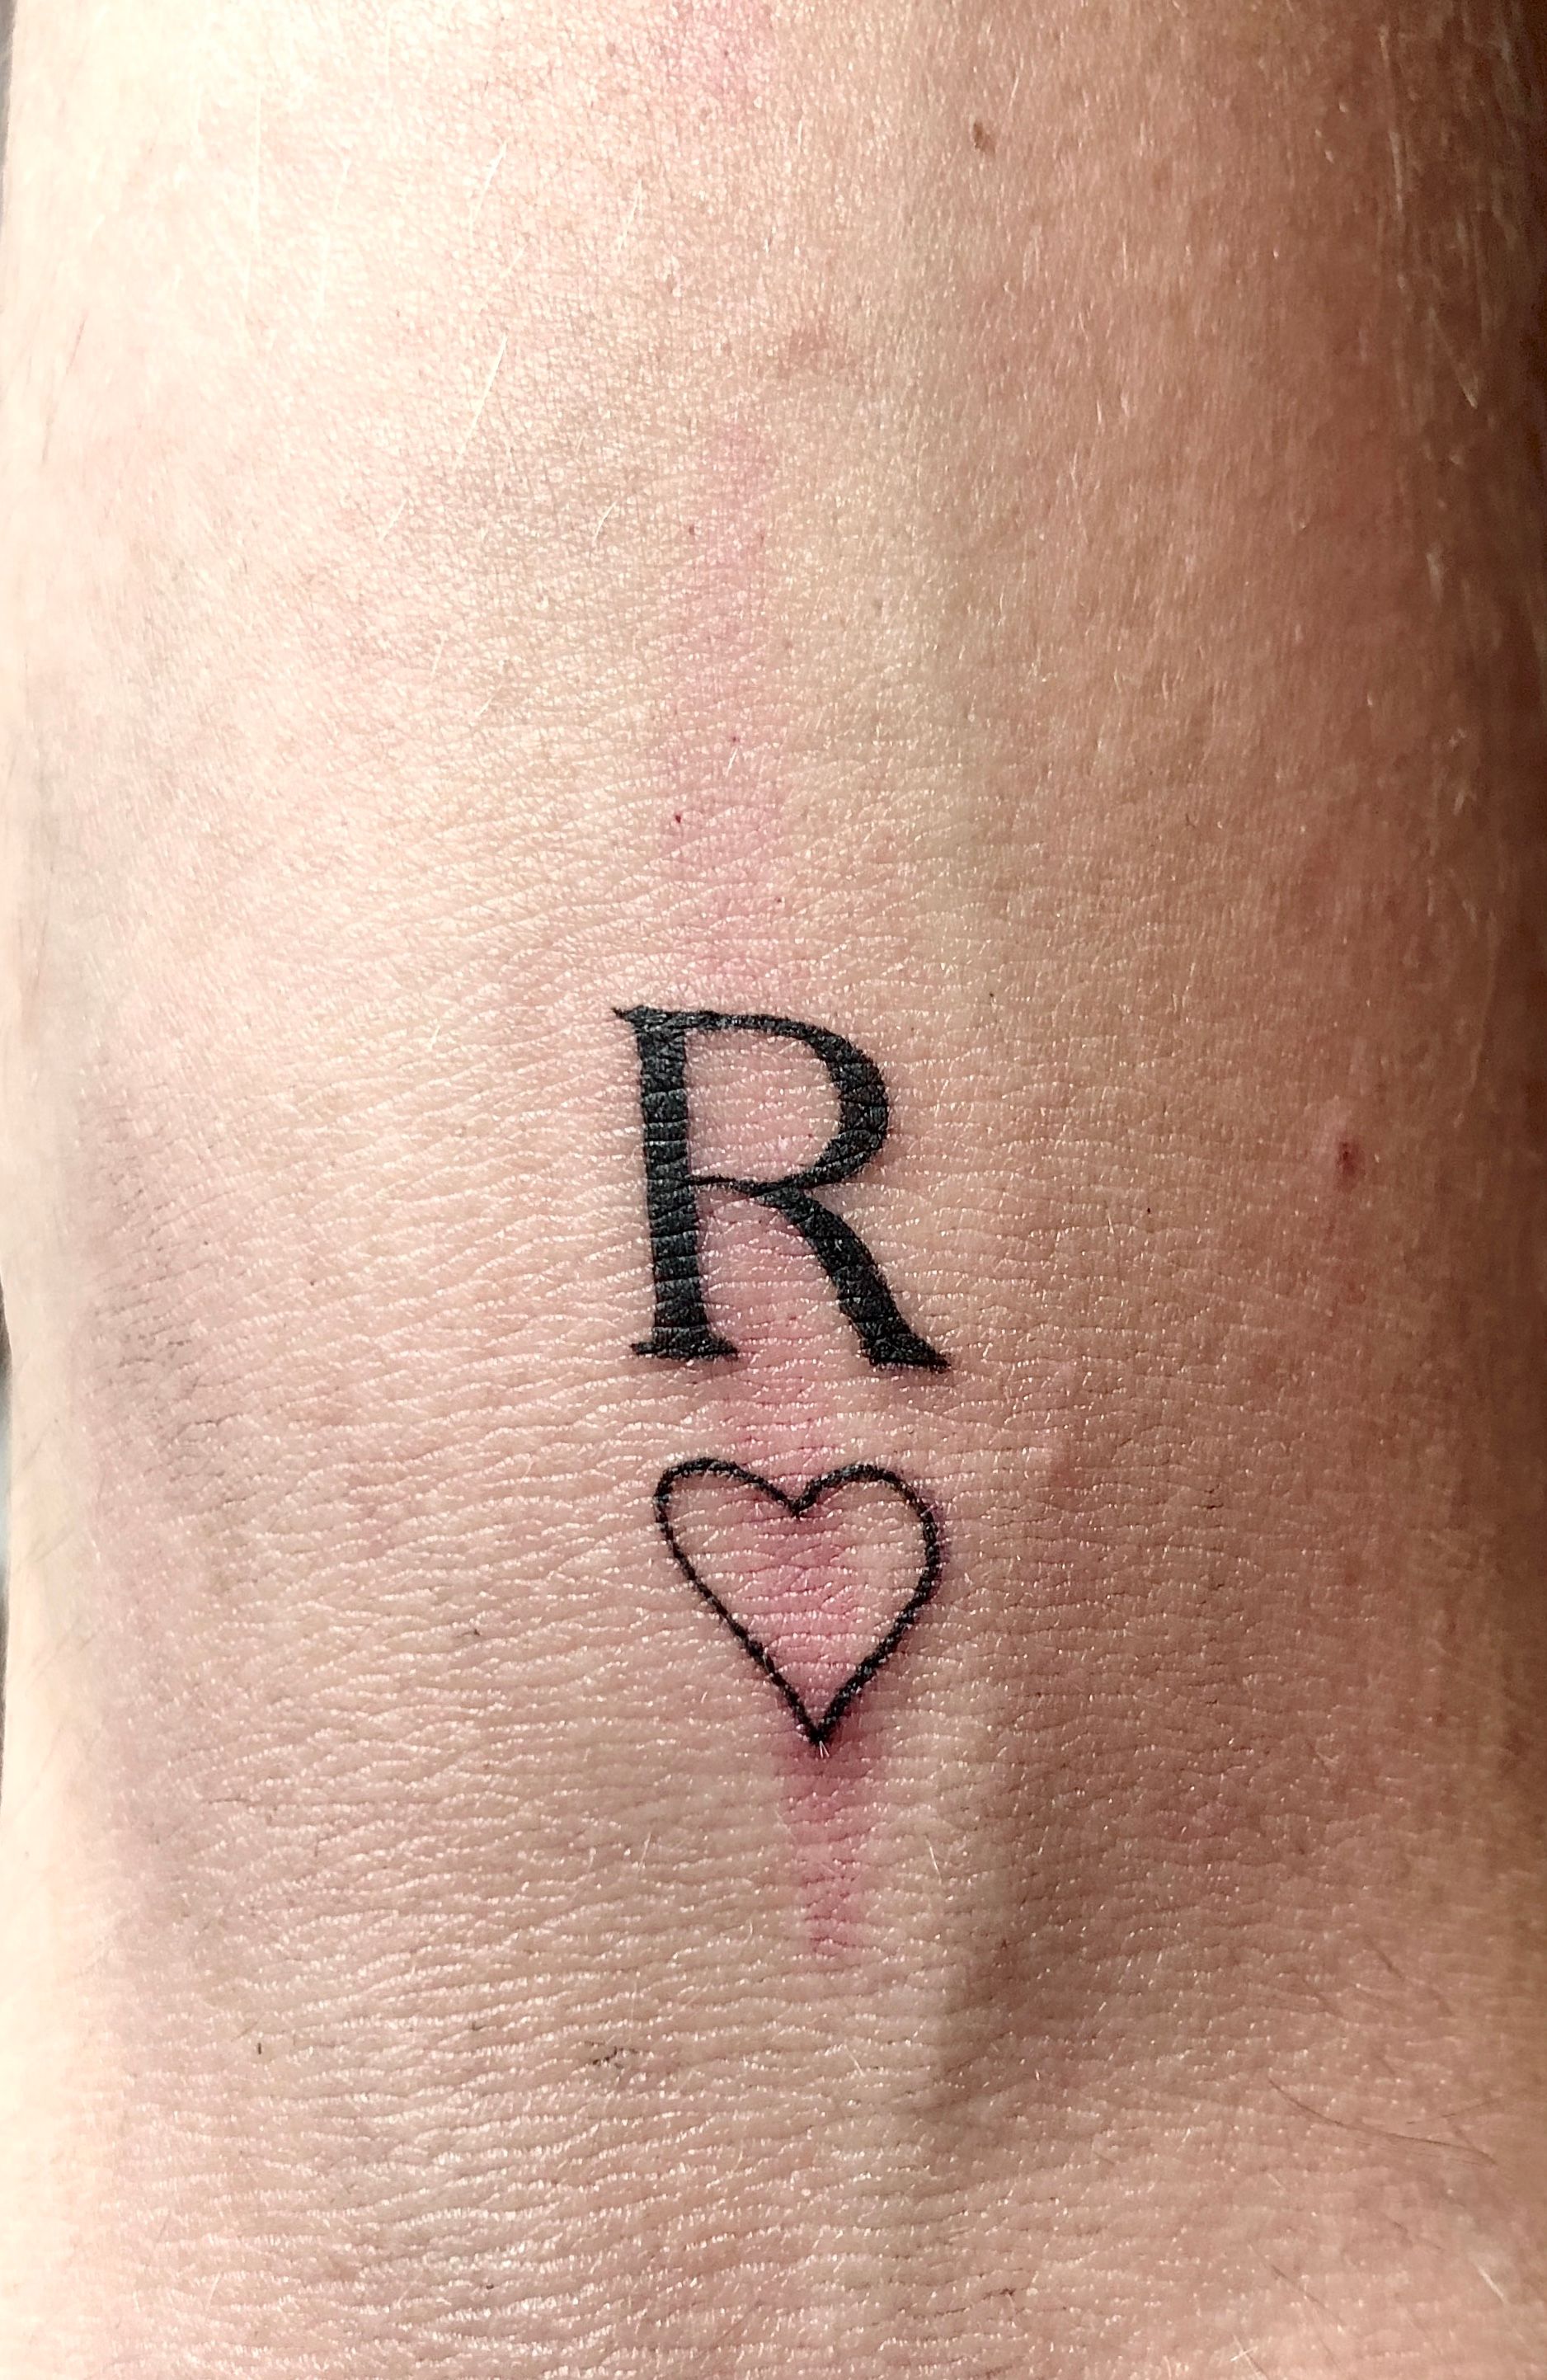 BlackSwan Tattoo Piravom  letter tattoo  initials tattoo Letter R    Initial tattoos are probably one of the best tattoos in small tattoo  category  They are usually tiny and